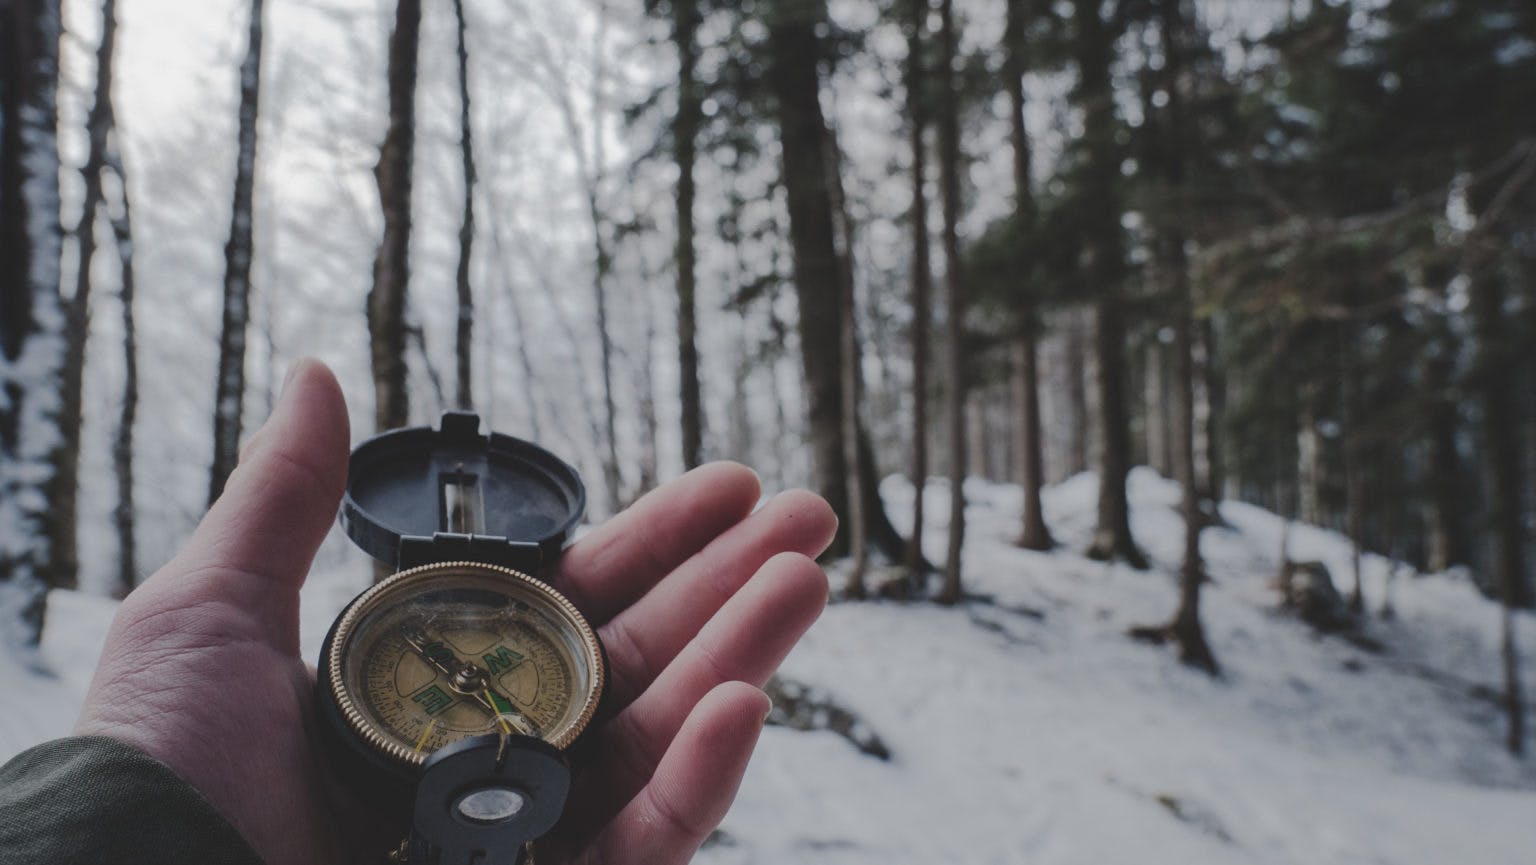 A compass in the hand